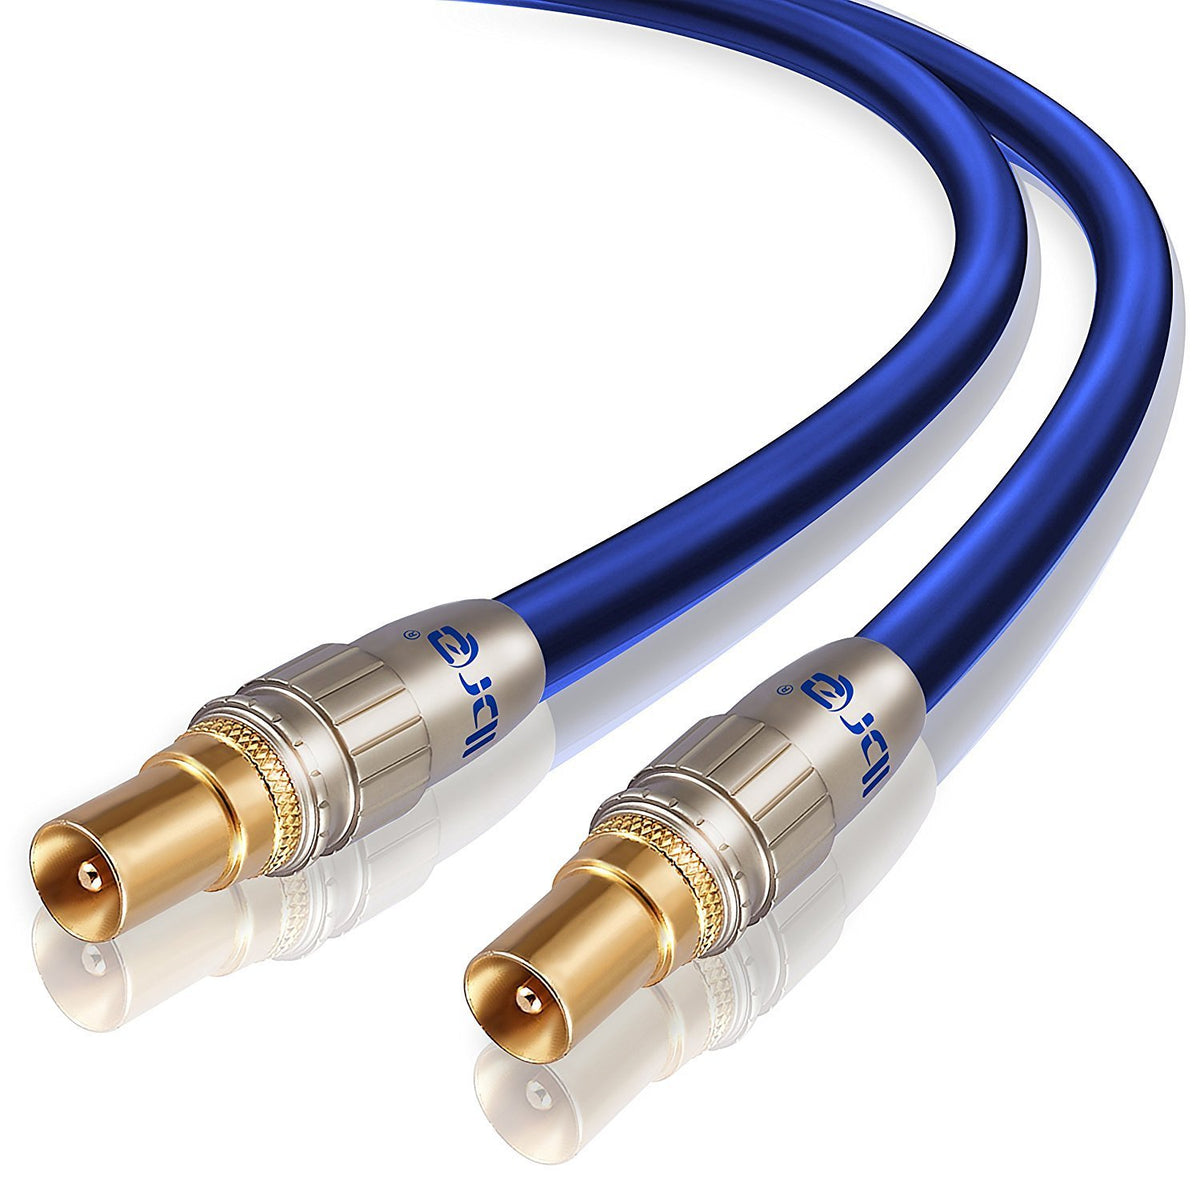 5M HDTV Antenna Cable | TV Aerial Cable | Premium Freeview Coaxial Cable | Connectors: Coax Male to Coax Male | For UHF / RF TVs, VCRs, DVD players, DVRs, cable boxes and satellite | IBRA Blue Gold